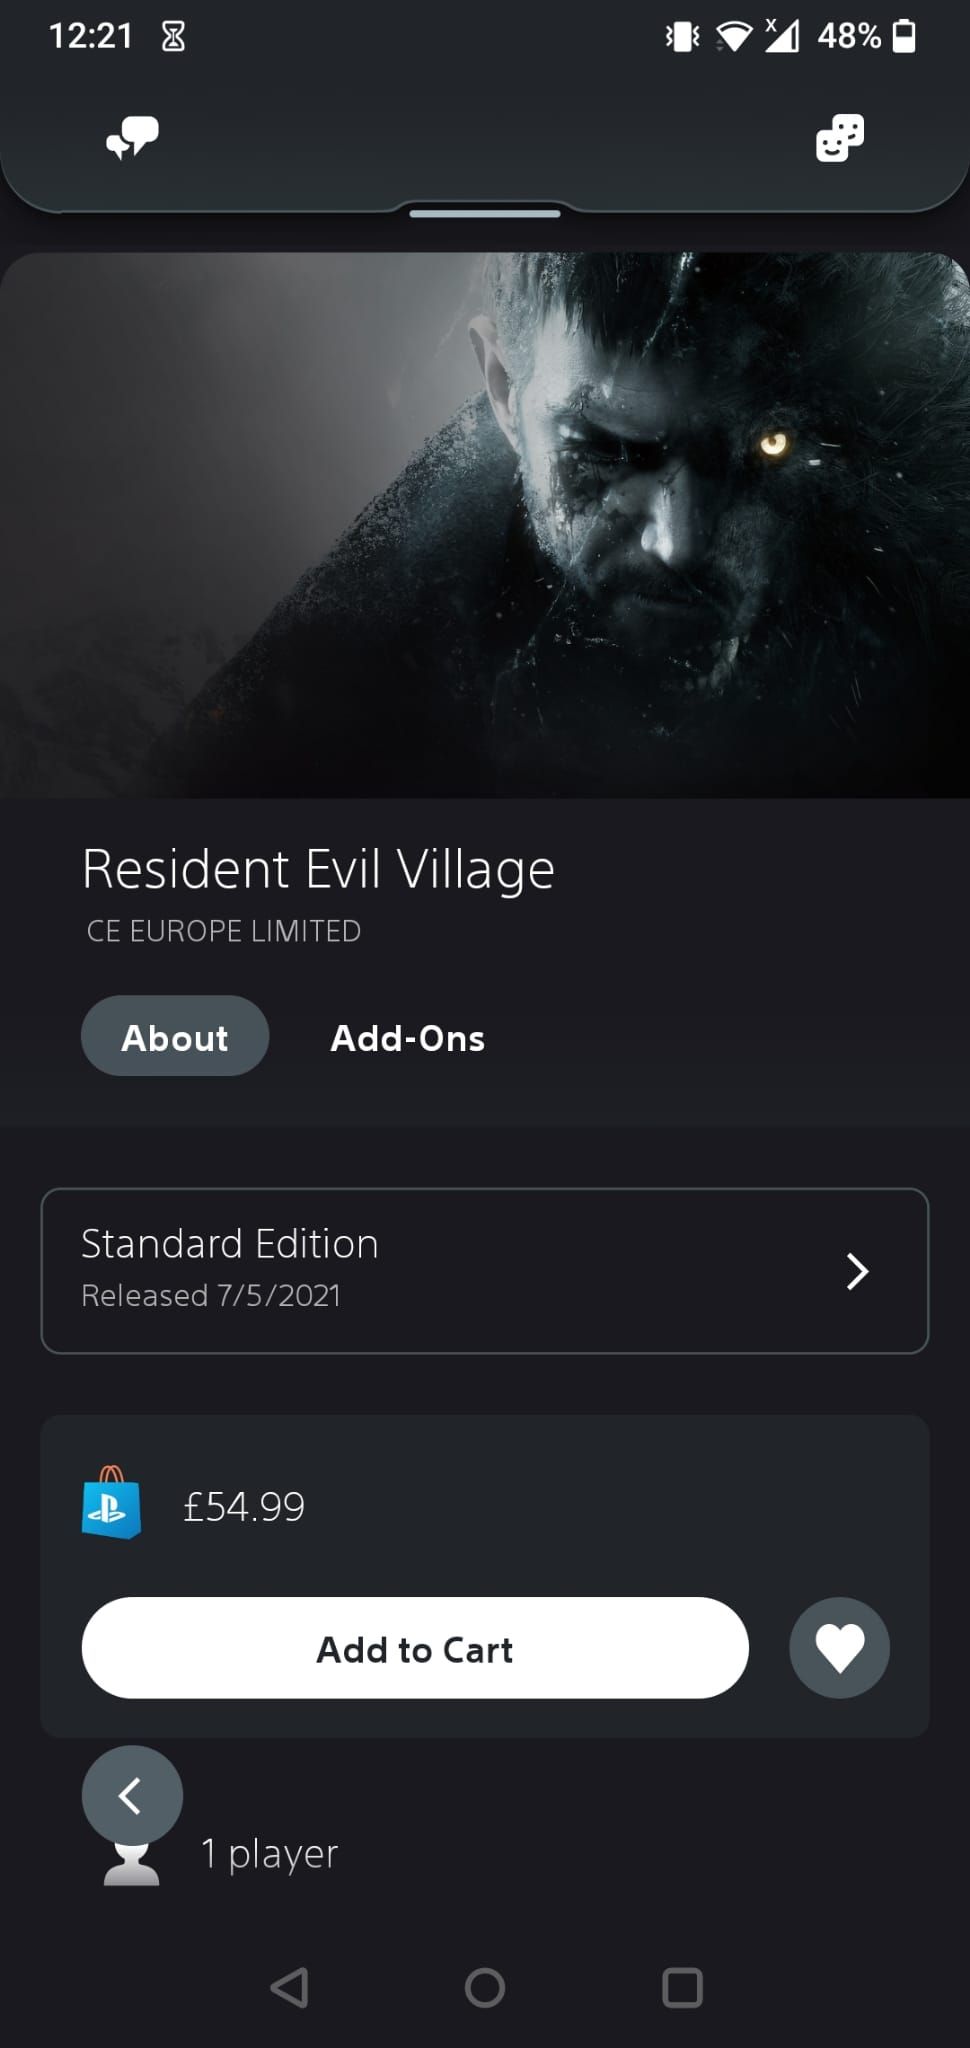 The game page for Resident Evil Village on the PS app